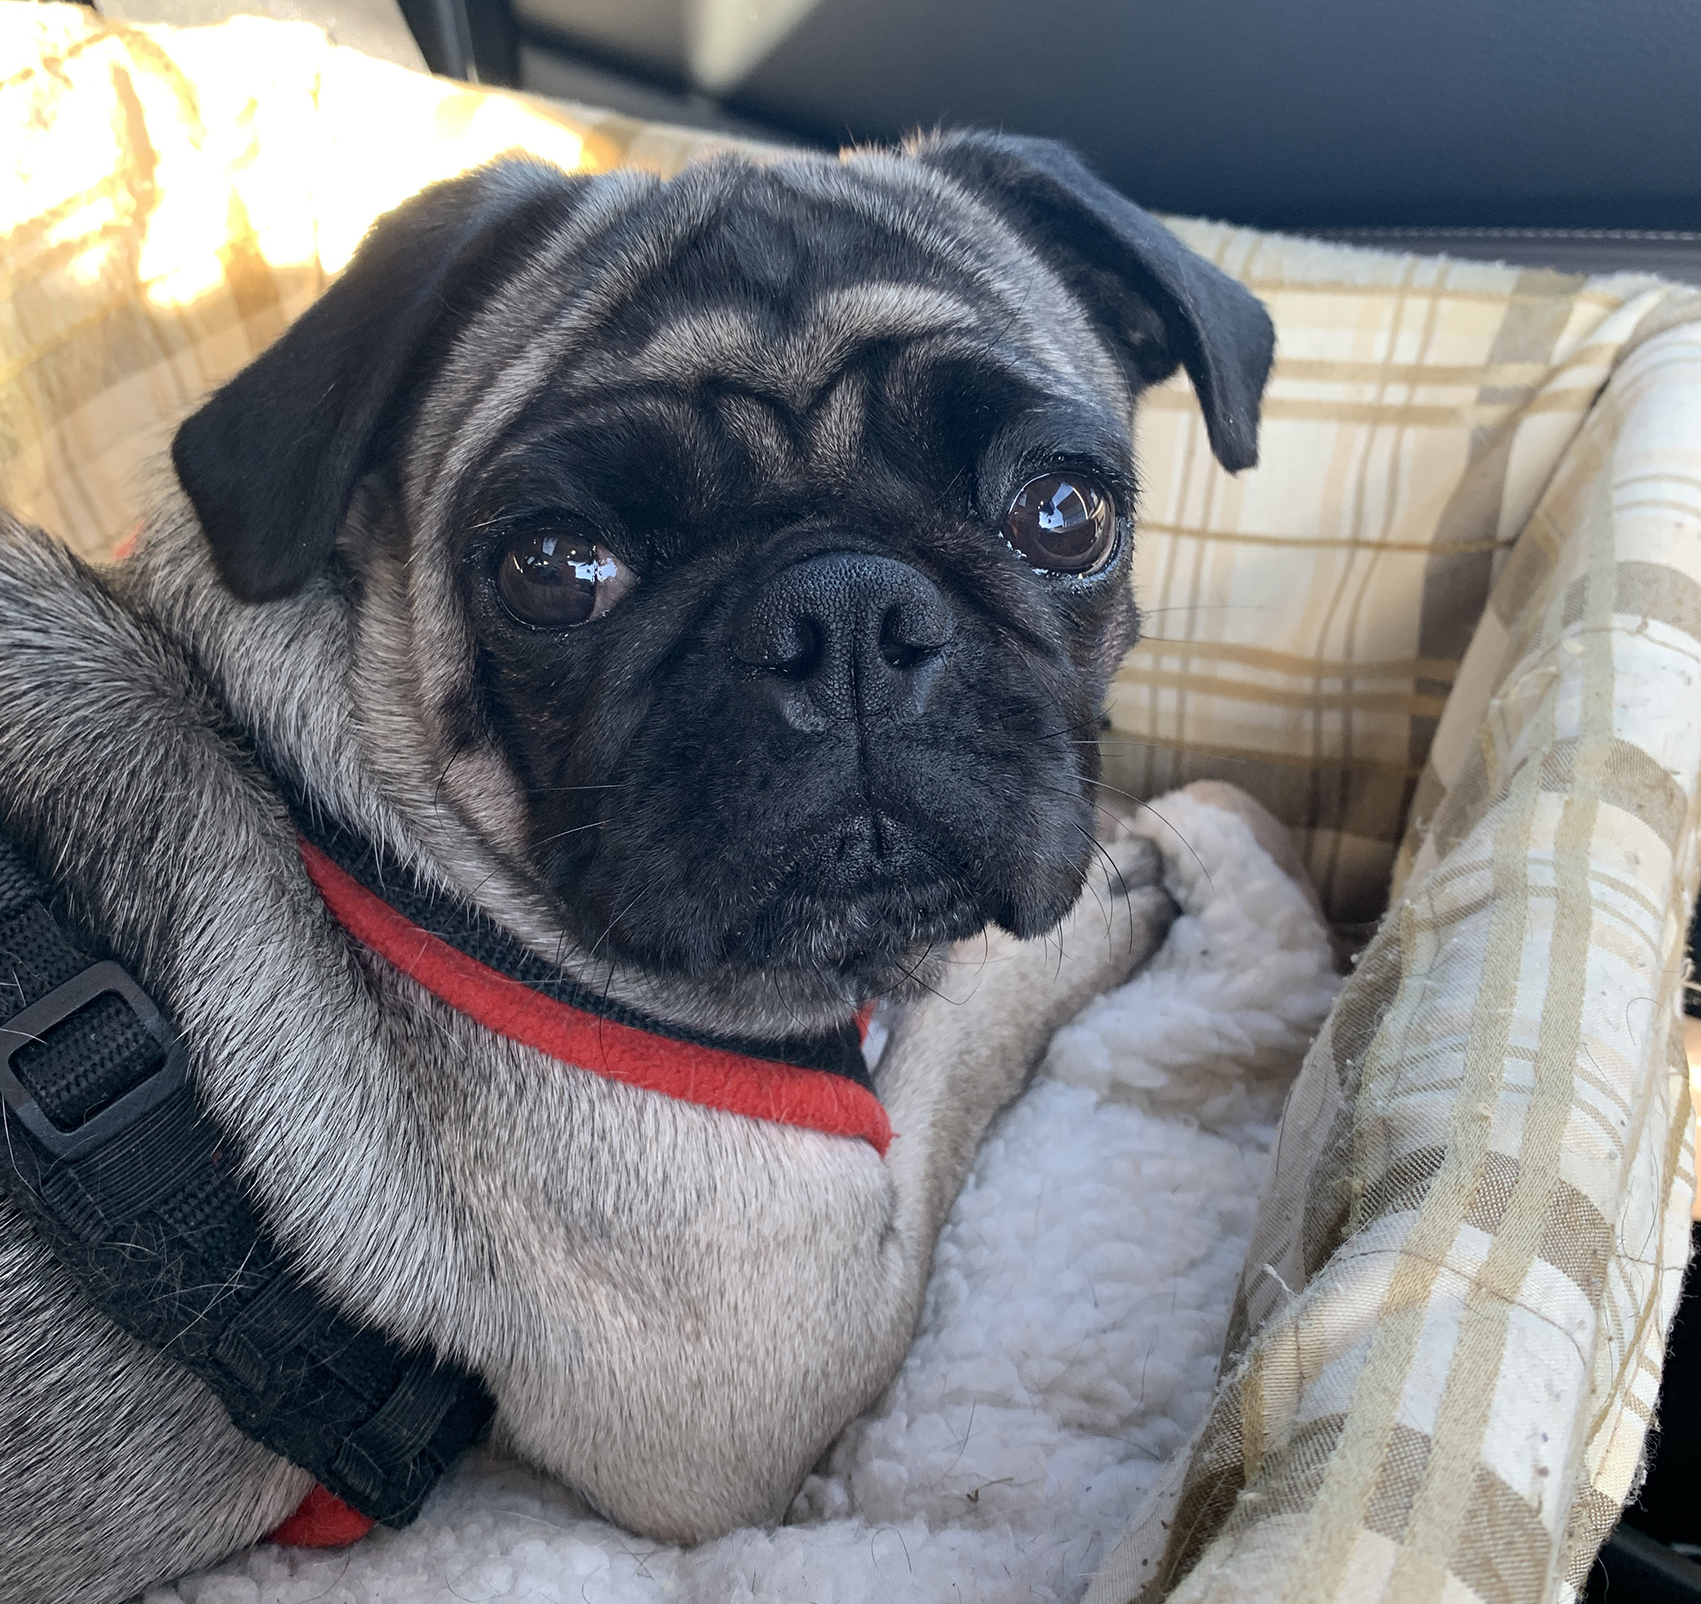 Peggy's wheels - image Wilma on https://pugprotectiontrust.org